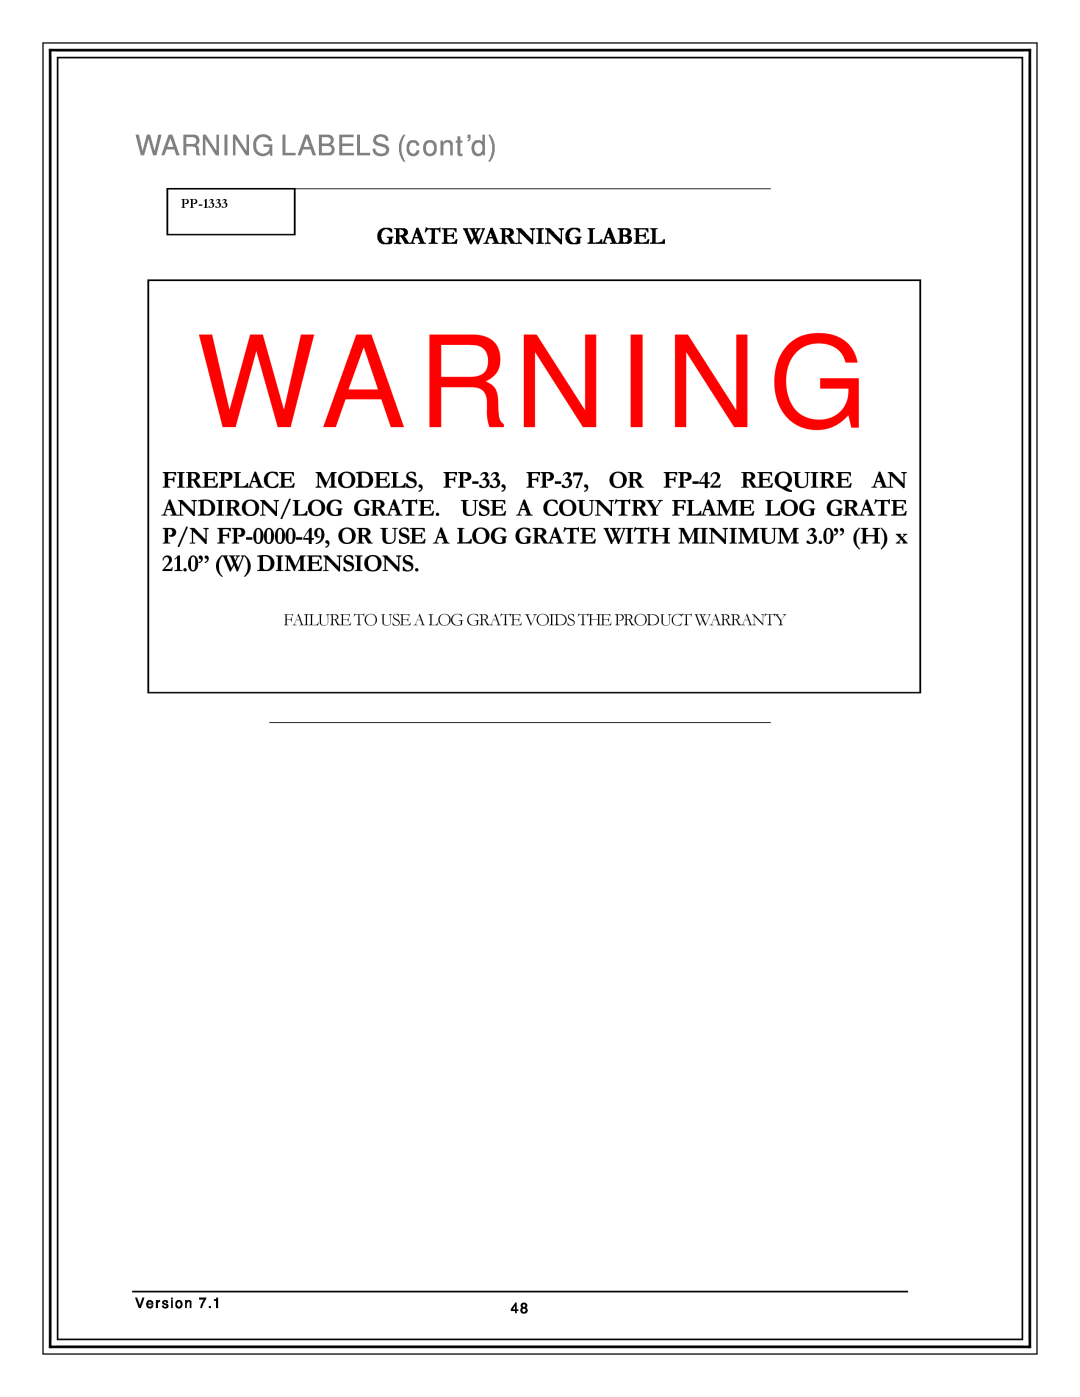 Country Flame Fireplace FP33, FP42, FP37 manual WARNING LABELS cont’d, Grate Warning Label, PP-1333, Version 